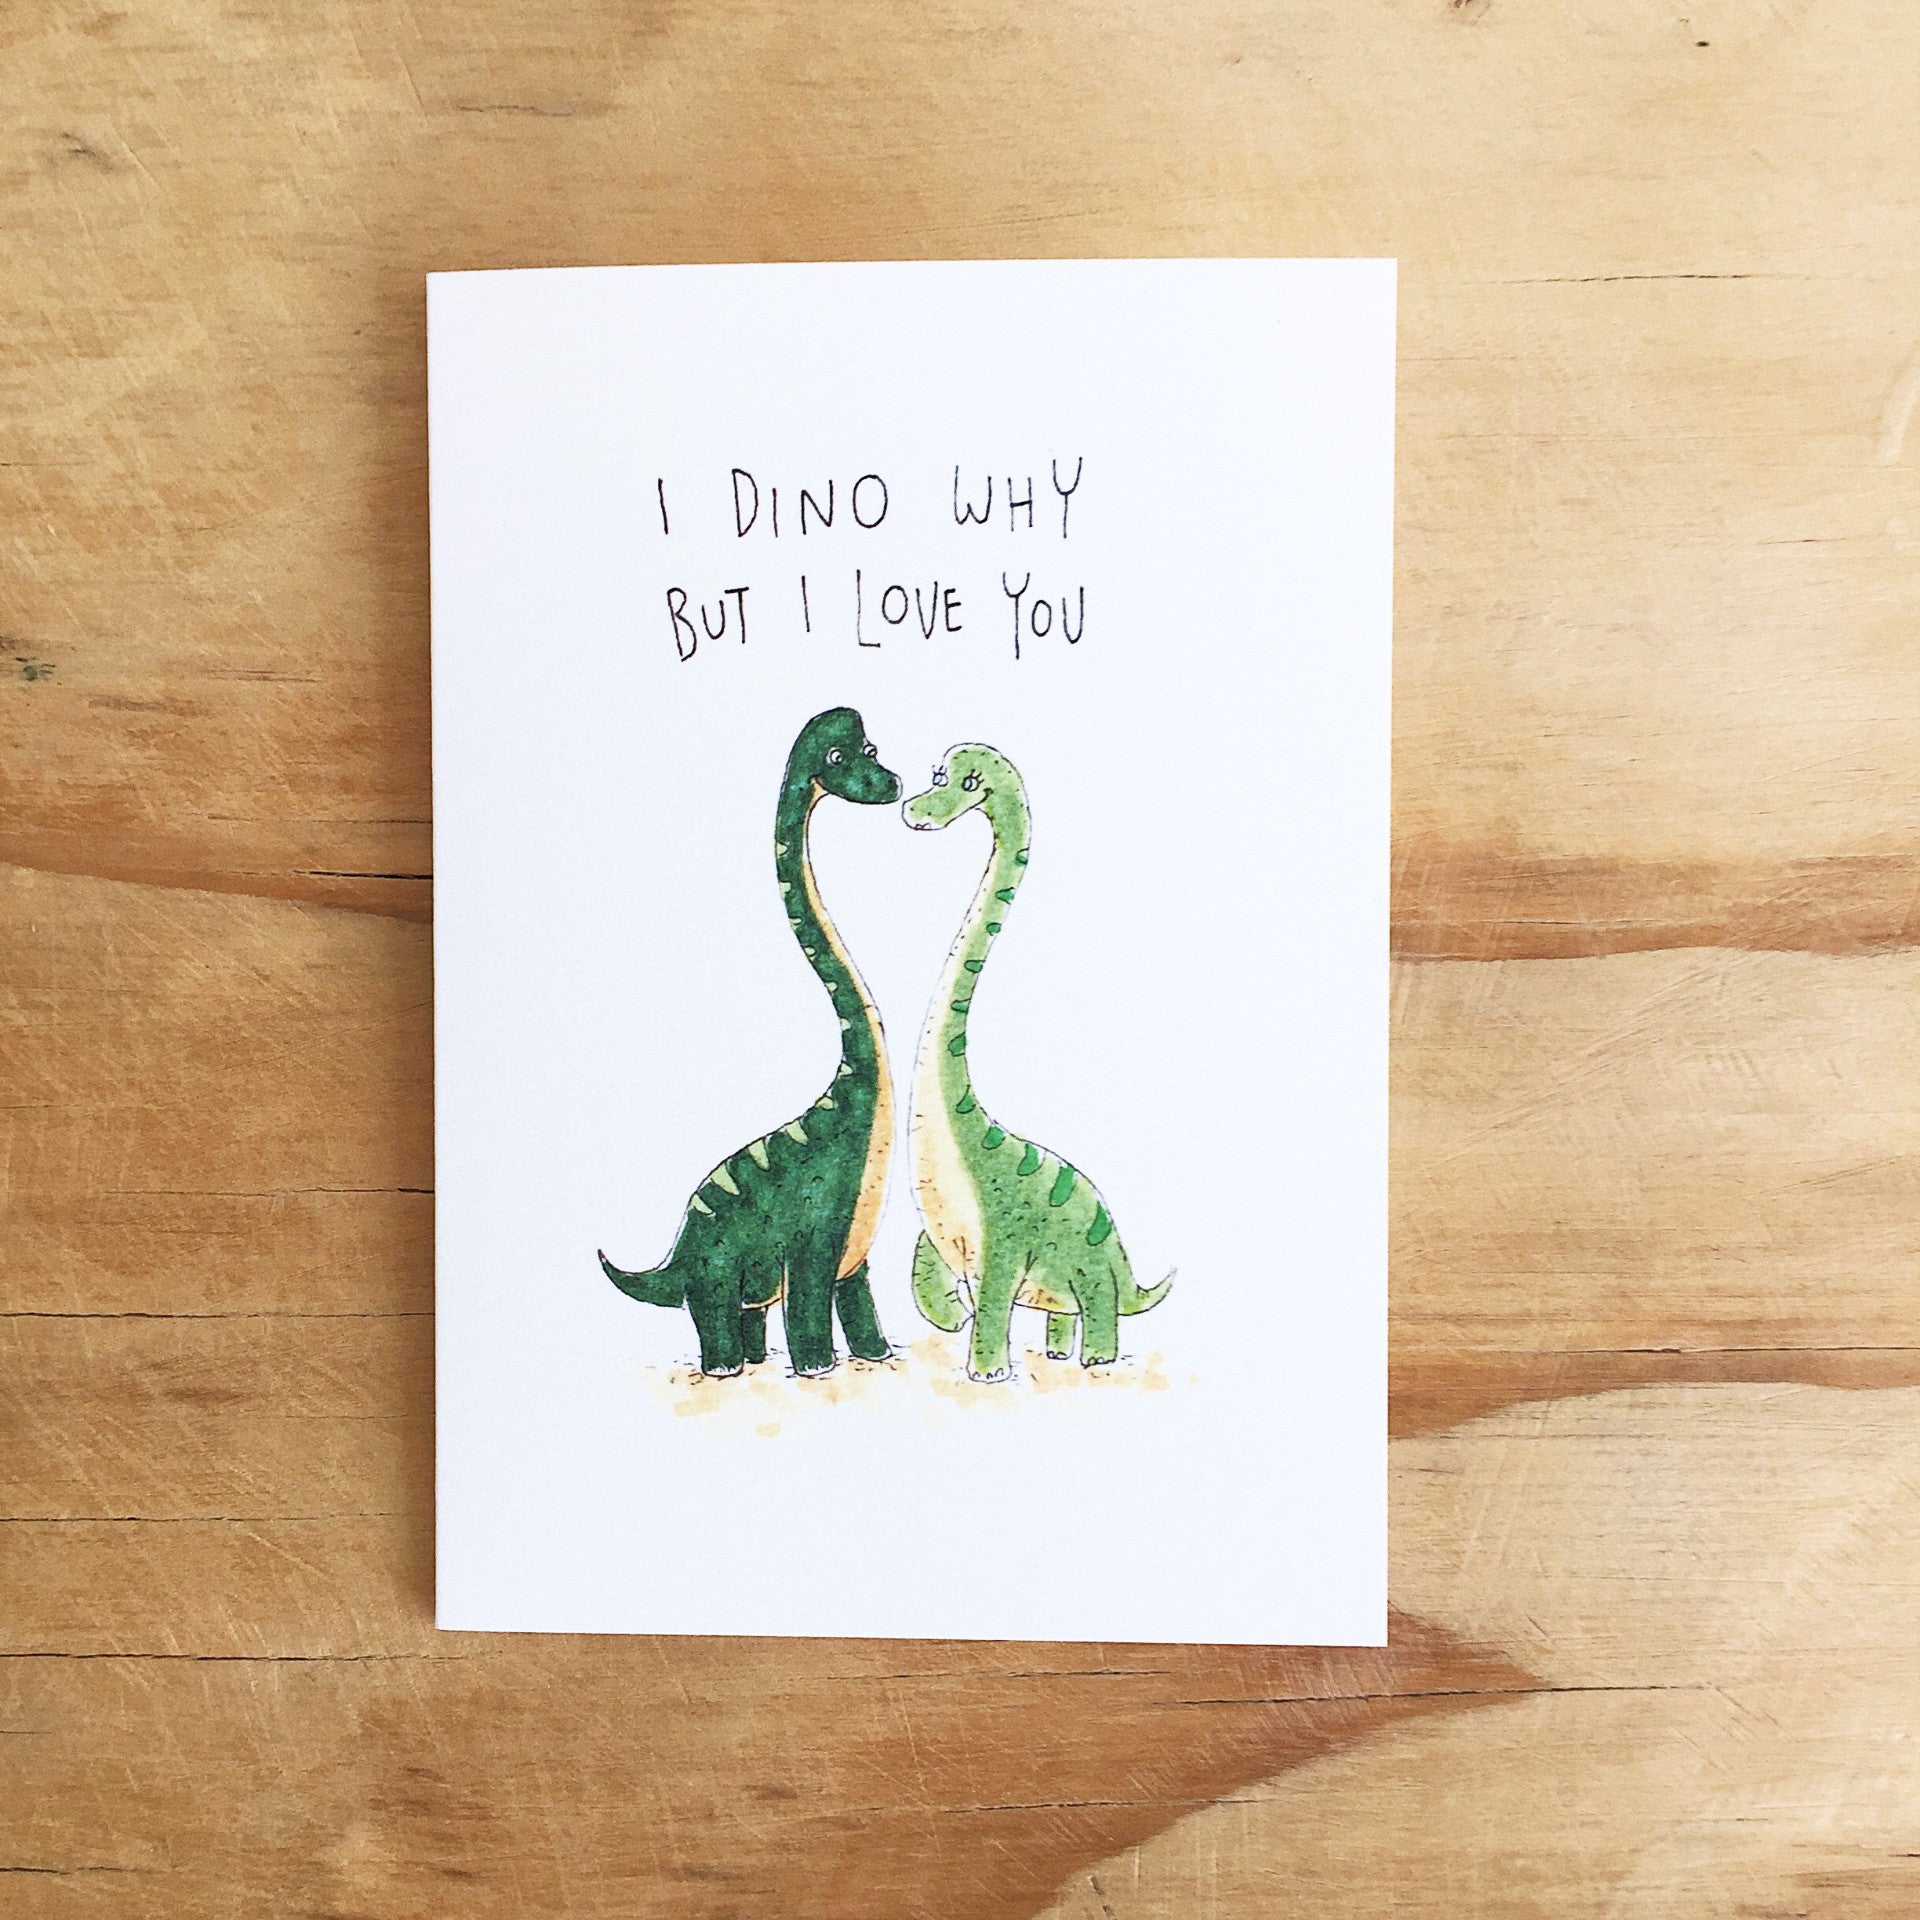 I Dino Why But I Love You - Well Drawn